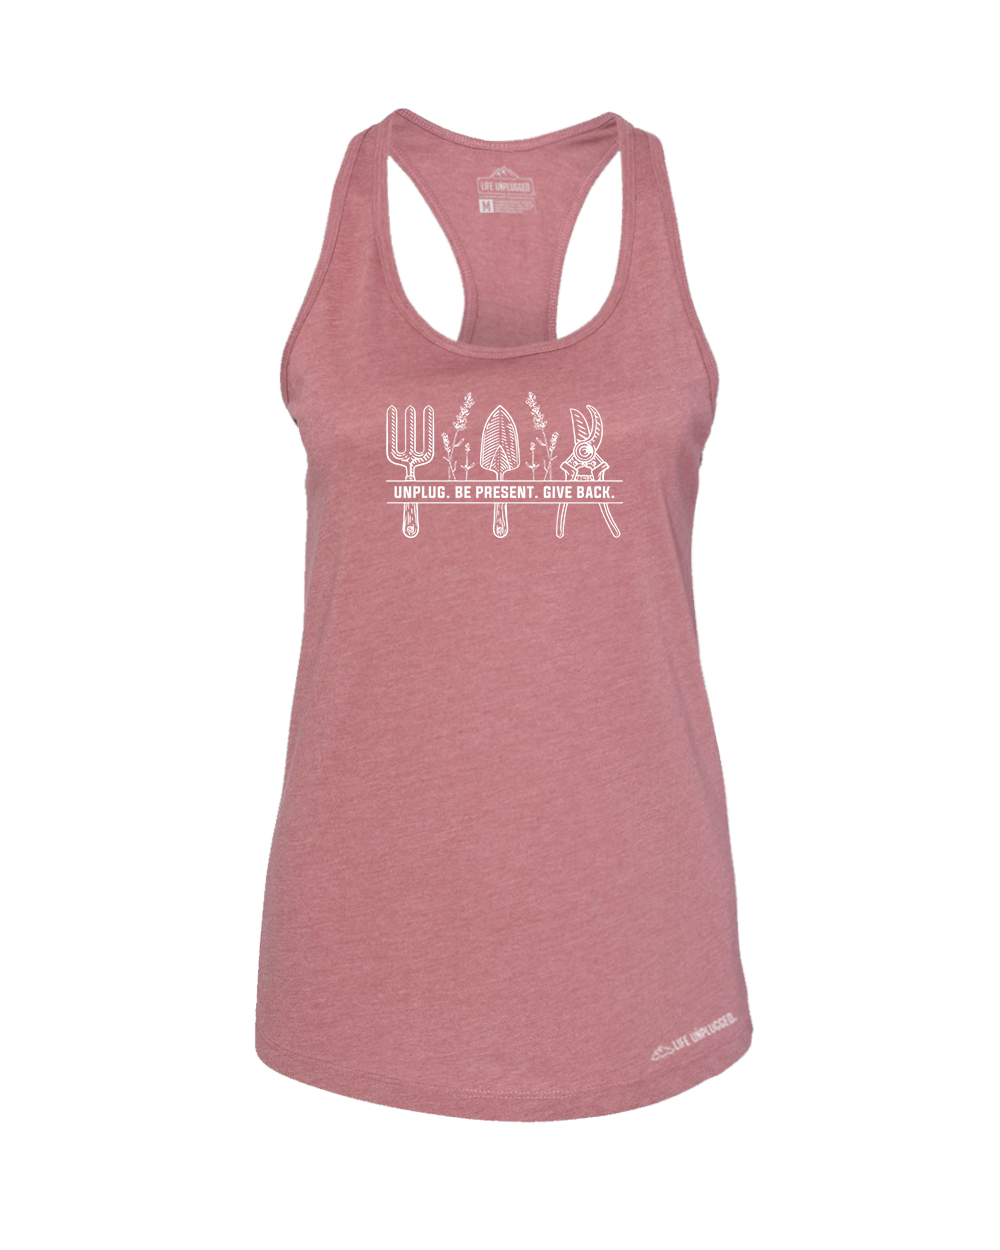 Gardening Premium Women's Relaxed Fit Racerback Tank Top - Life Unplugged